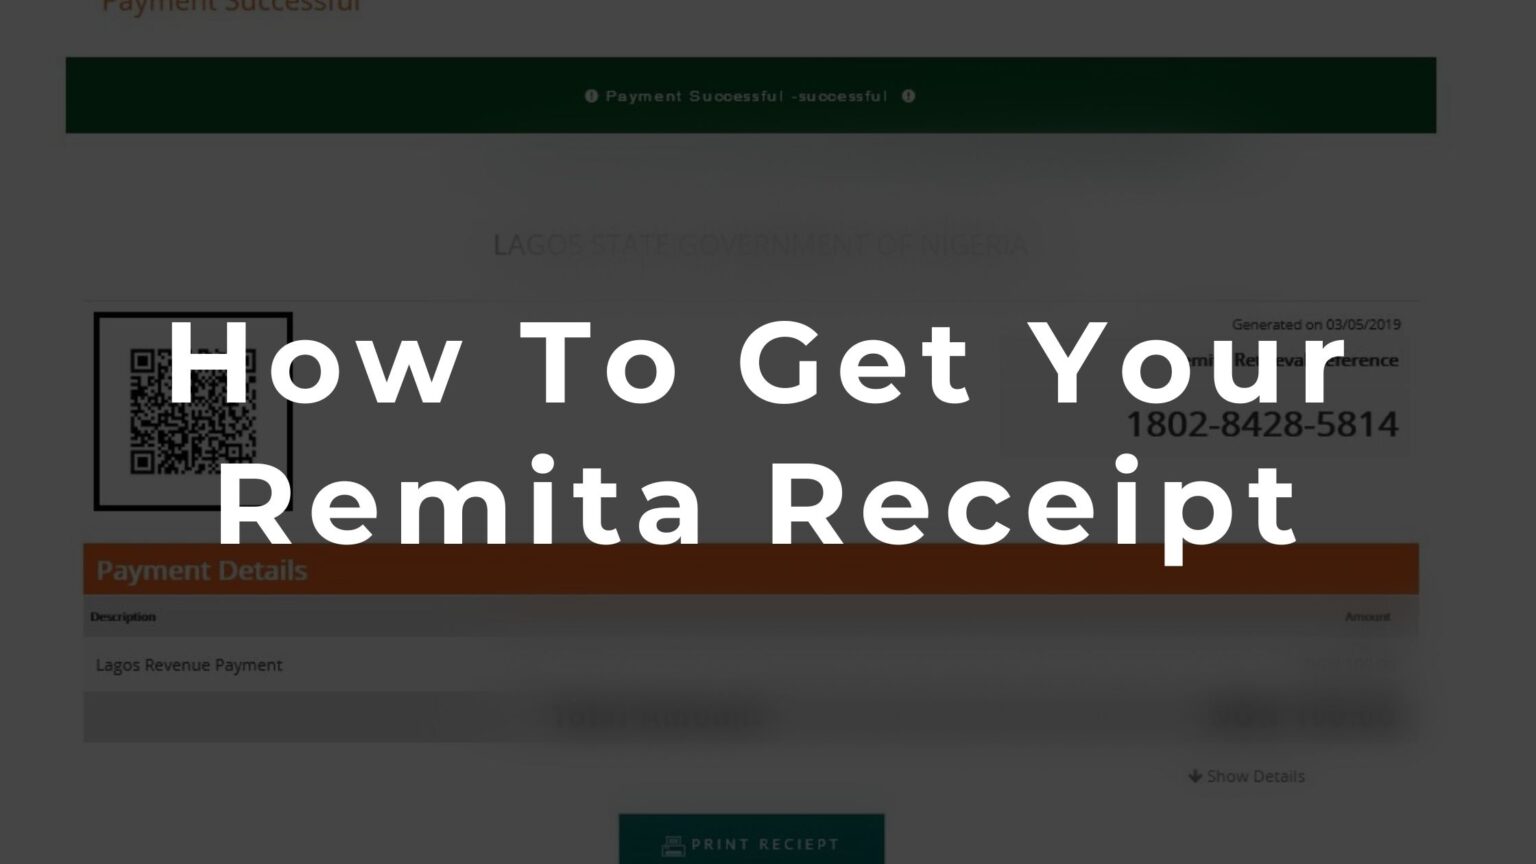 HOW TO GET YOUR REMITA RECEIPT